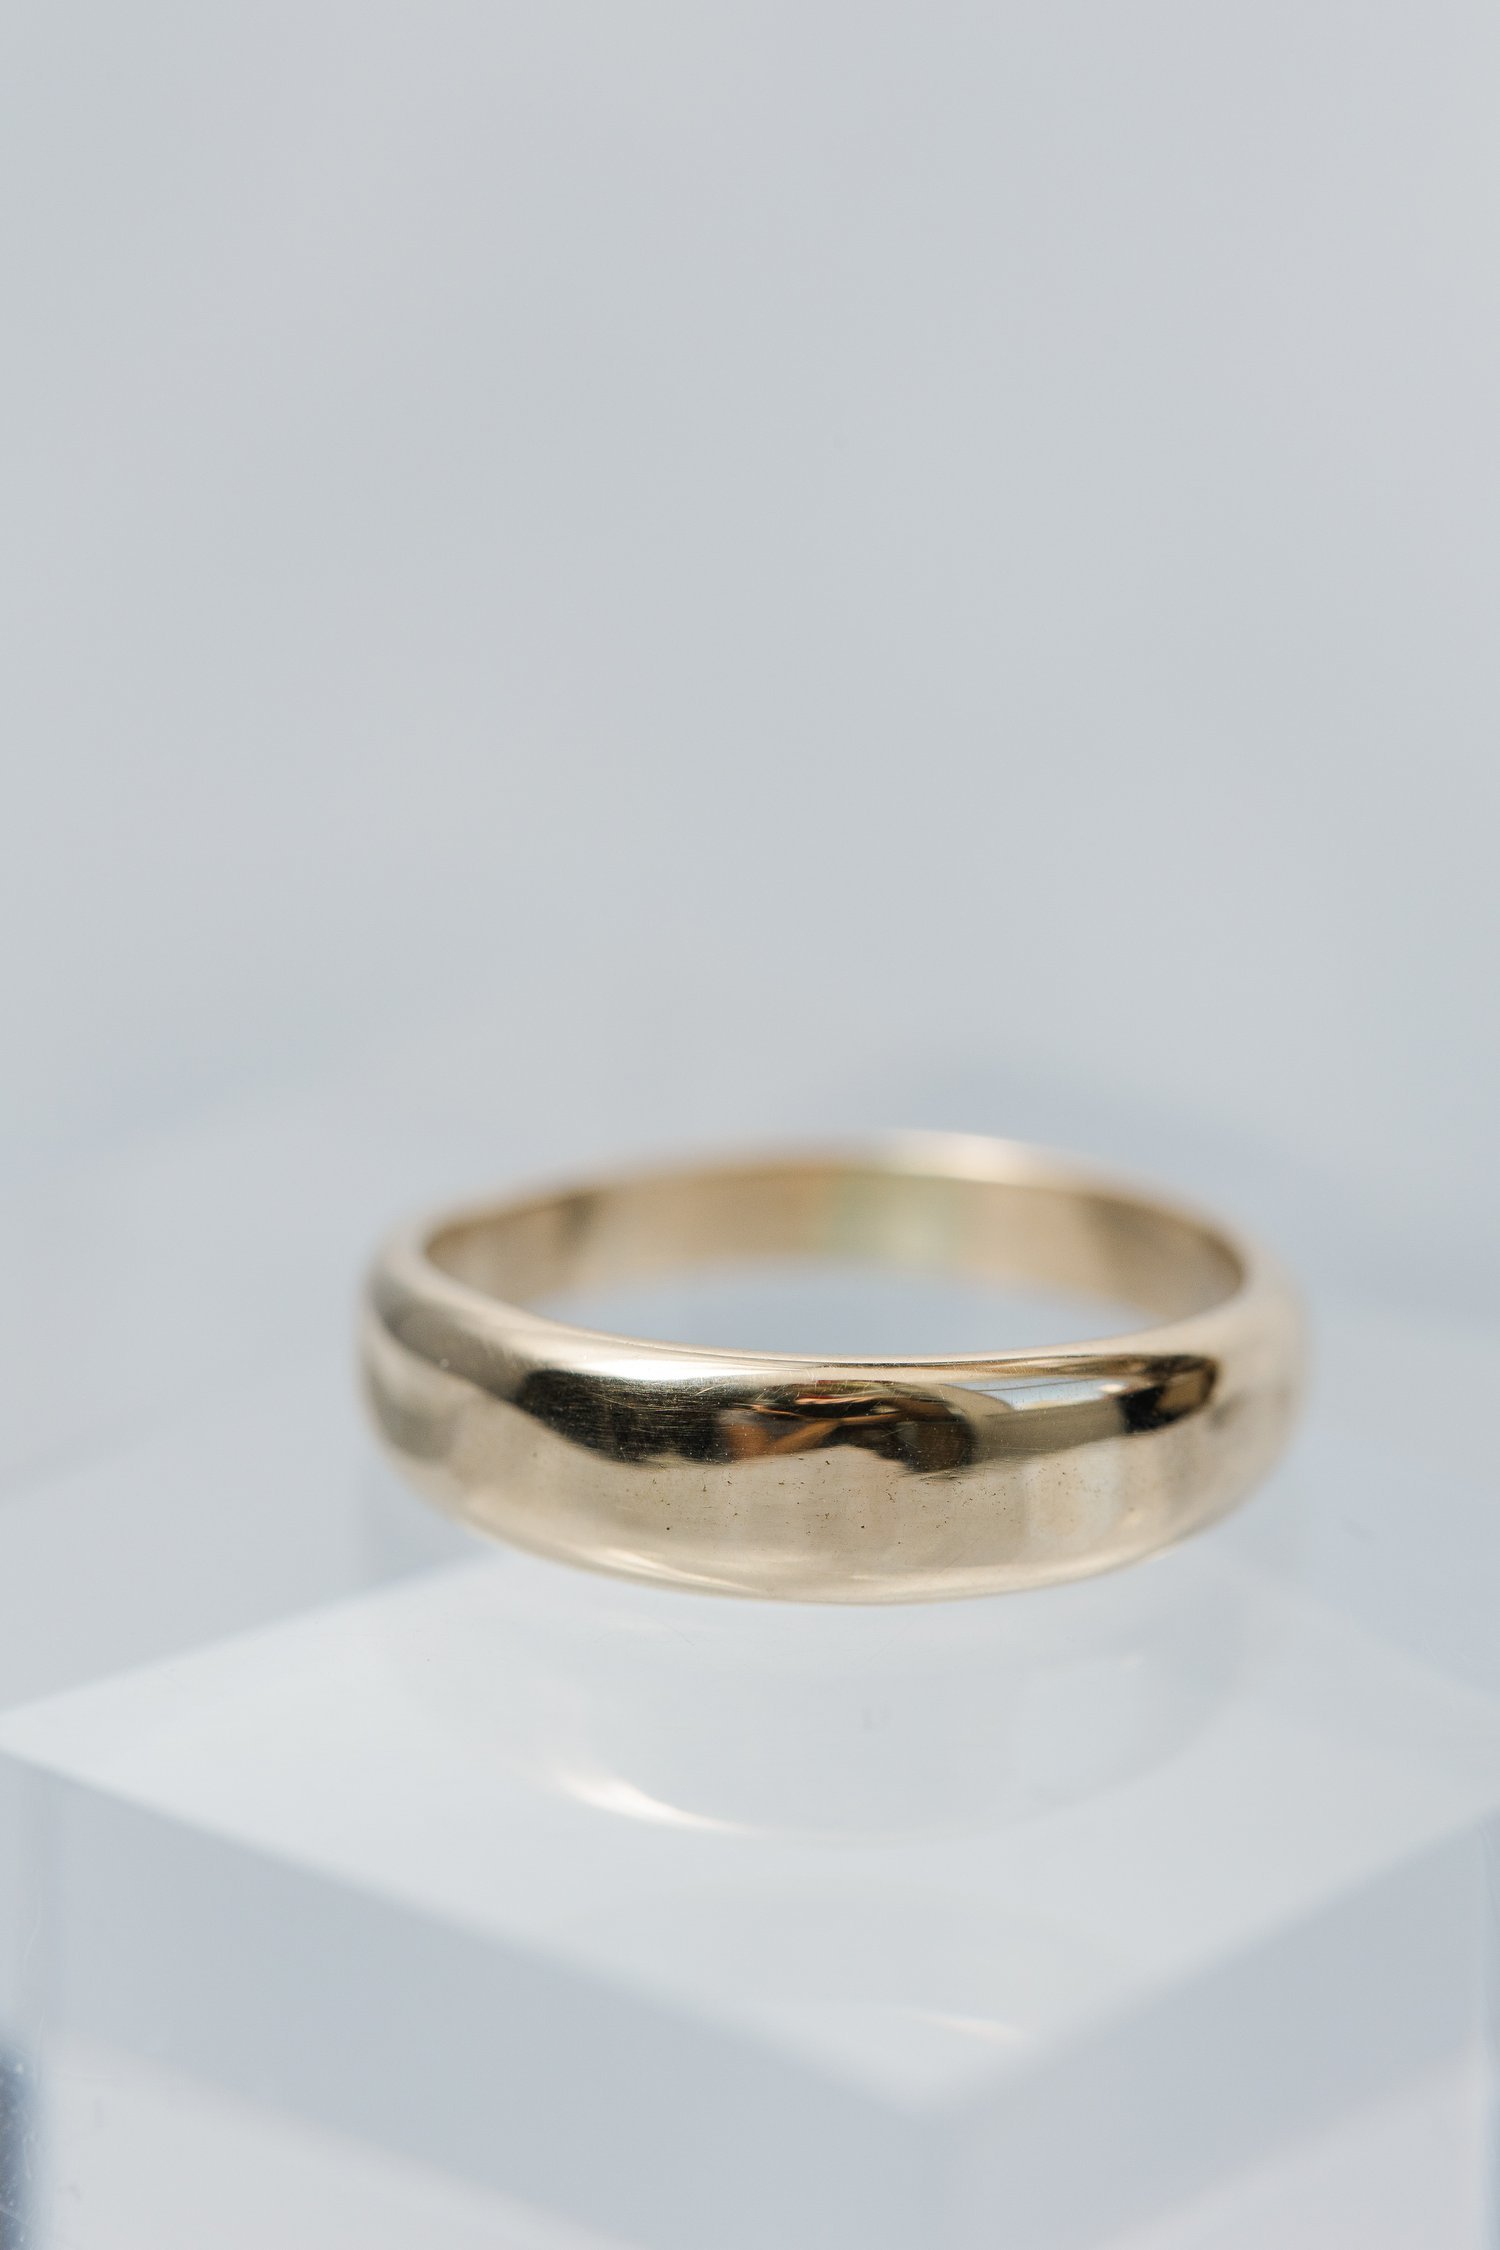 custom made tapered recycled yellow gold mens wedding band featuring a diamond made by Alexandria &amp; Company fine jewelers